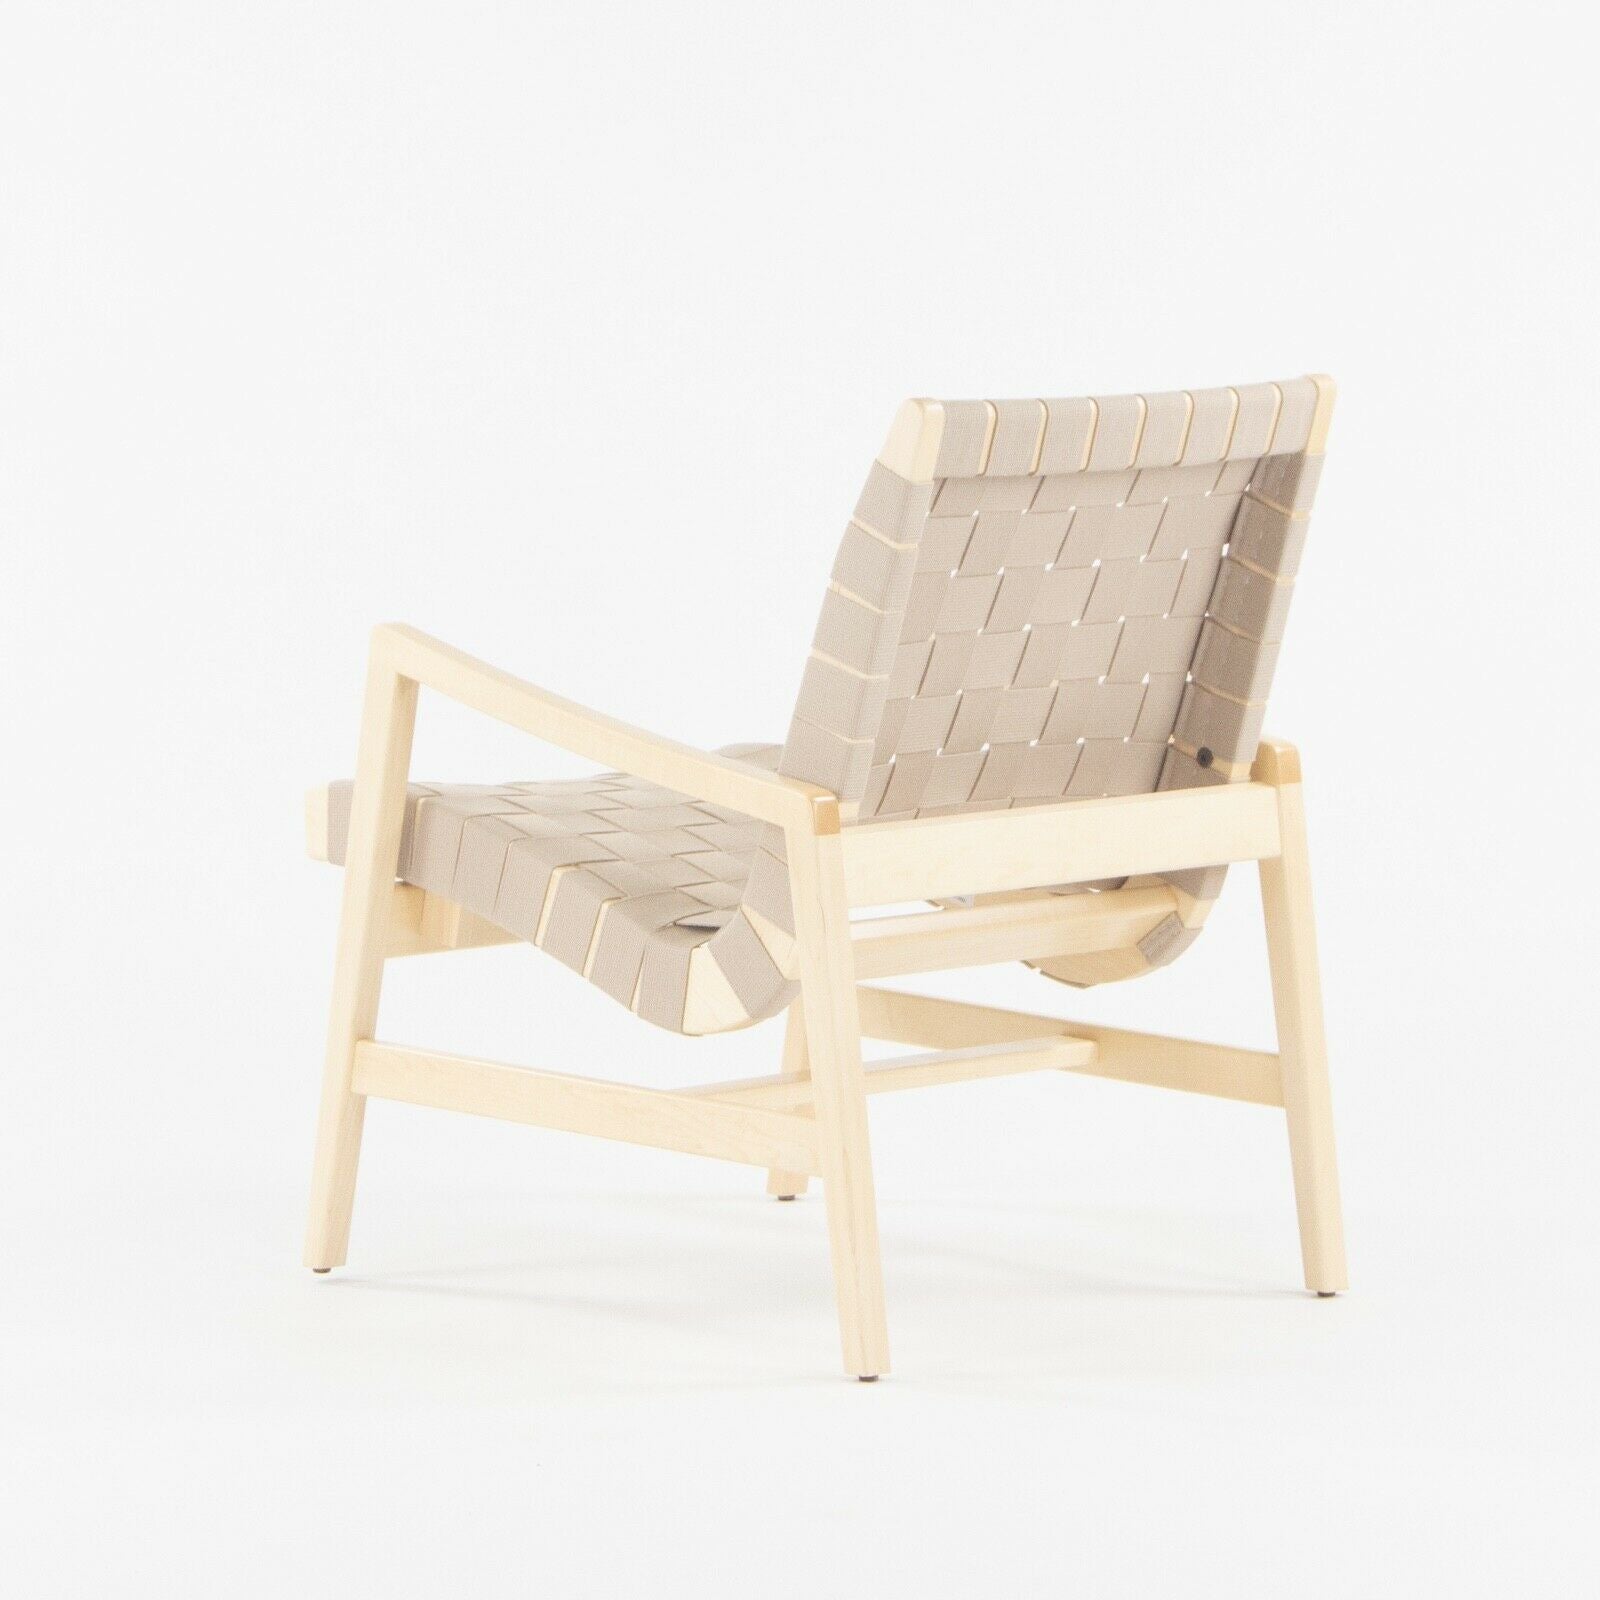 SOLD 2021 Jens Risom for Knoll Lounge Chair with Arms in Maple Frame & Flax Webbing